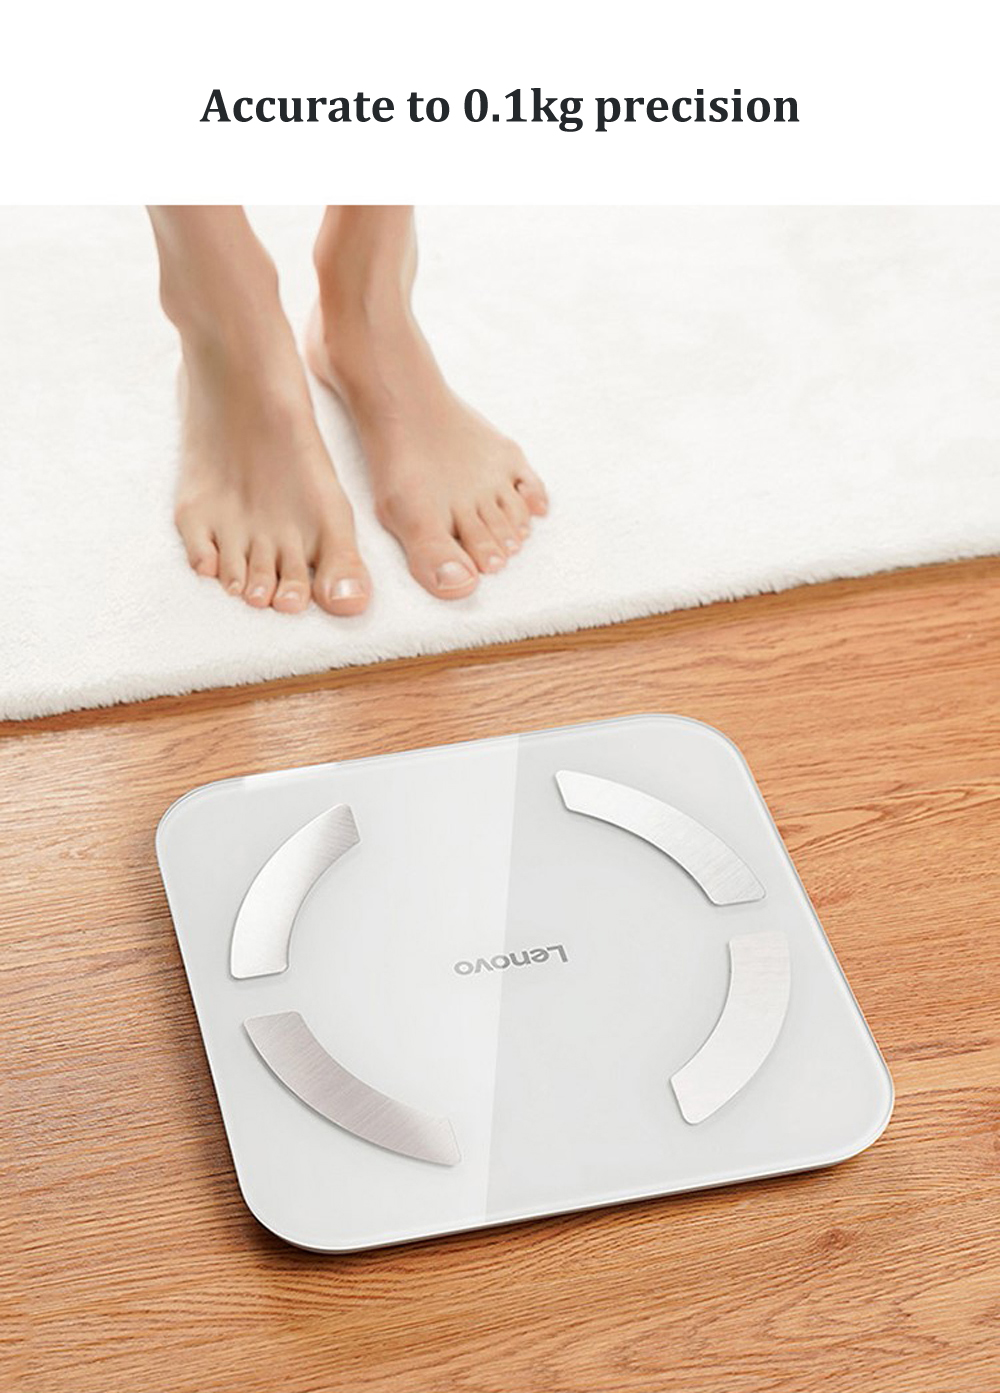 Lenovoreg-HS11-Smart-Wireless-Body-Fat-Scale-Bluetooth-with-APP-Analysis-Intelligent-BMI-Weight-Scal-1923754-7